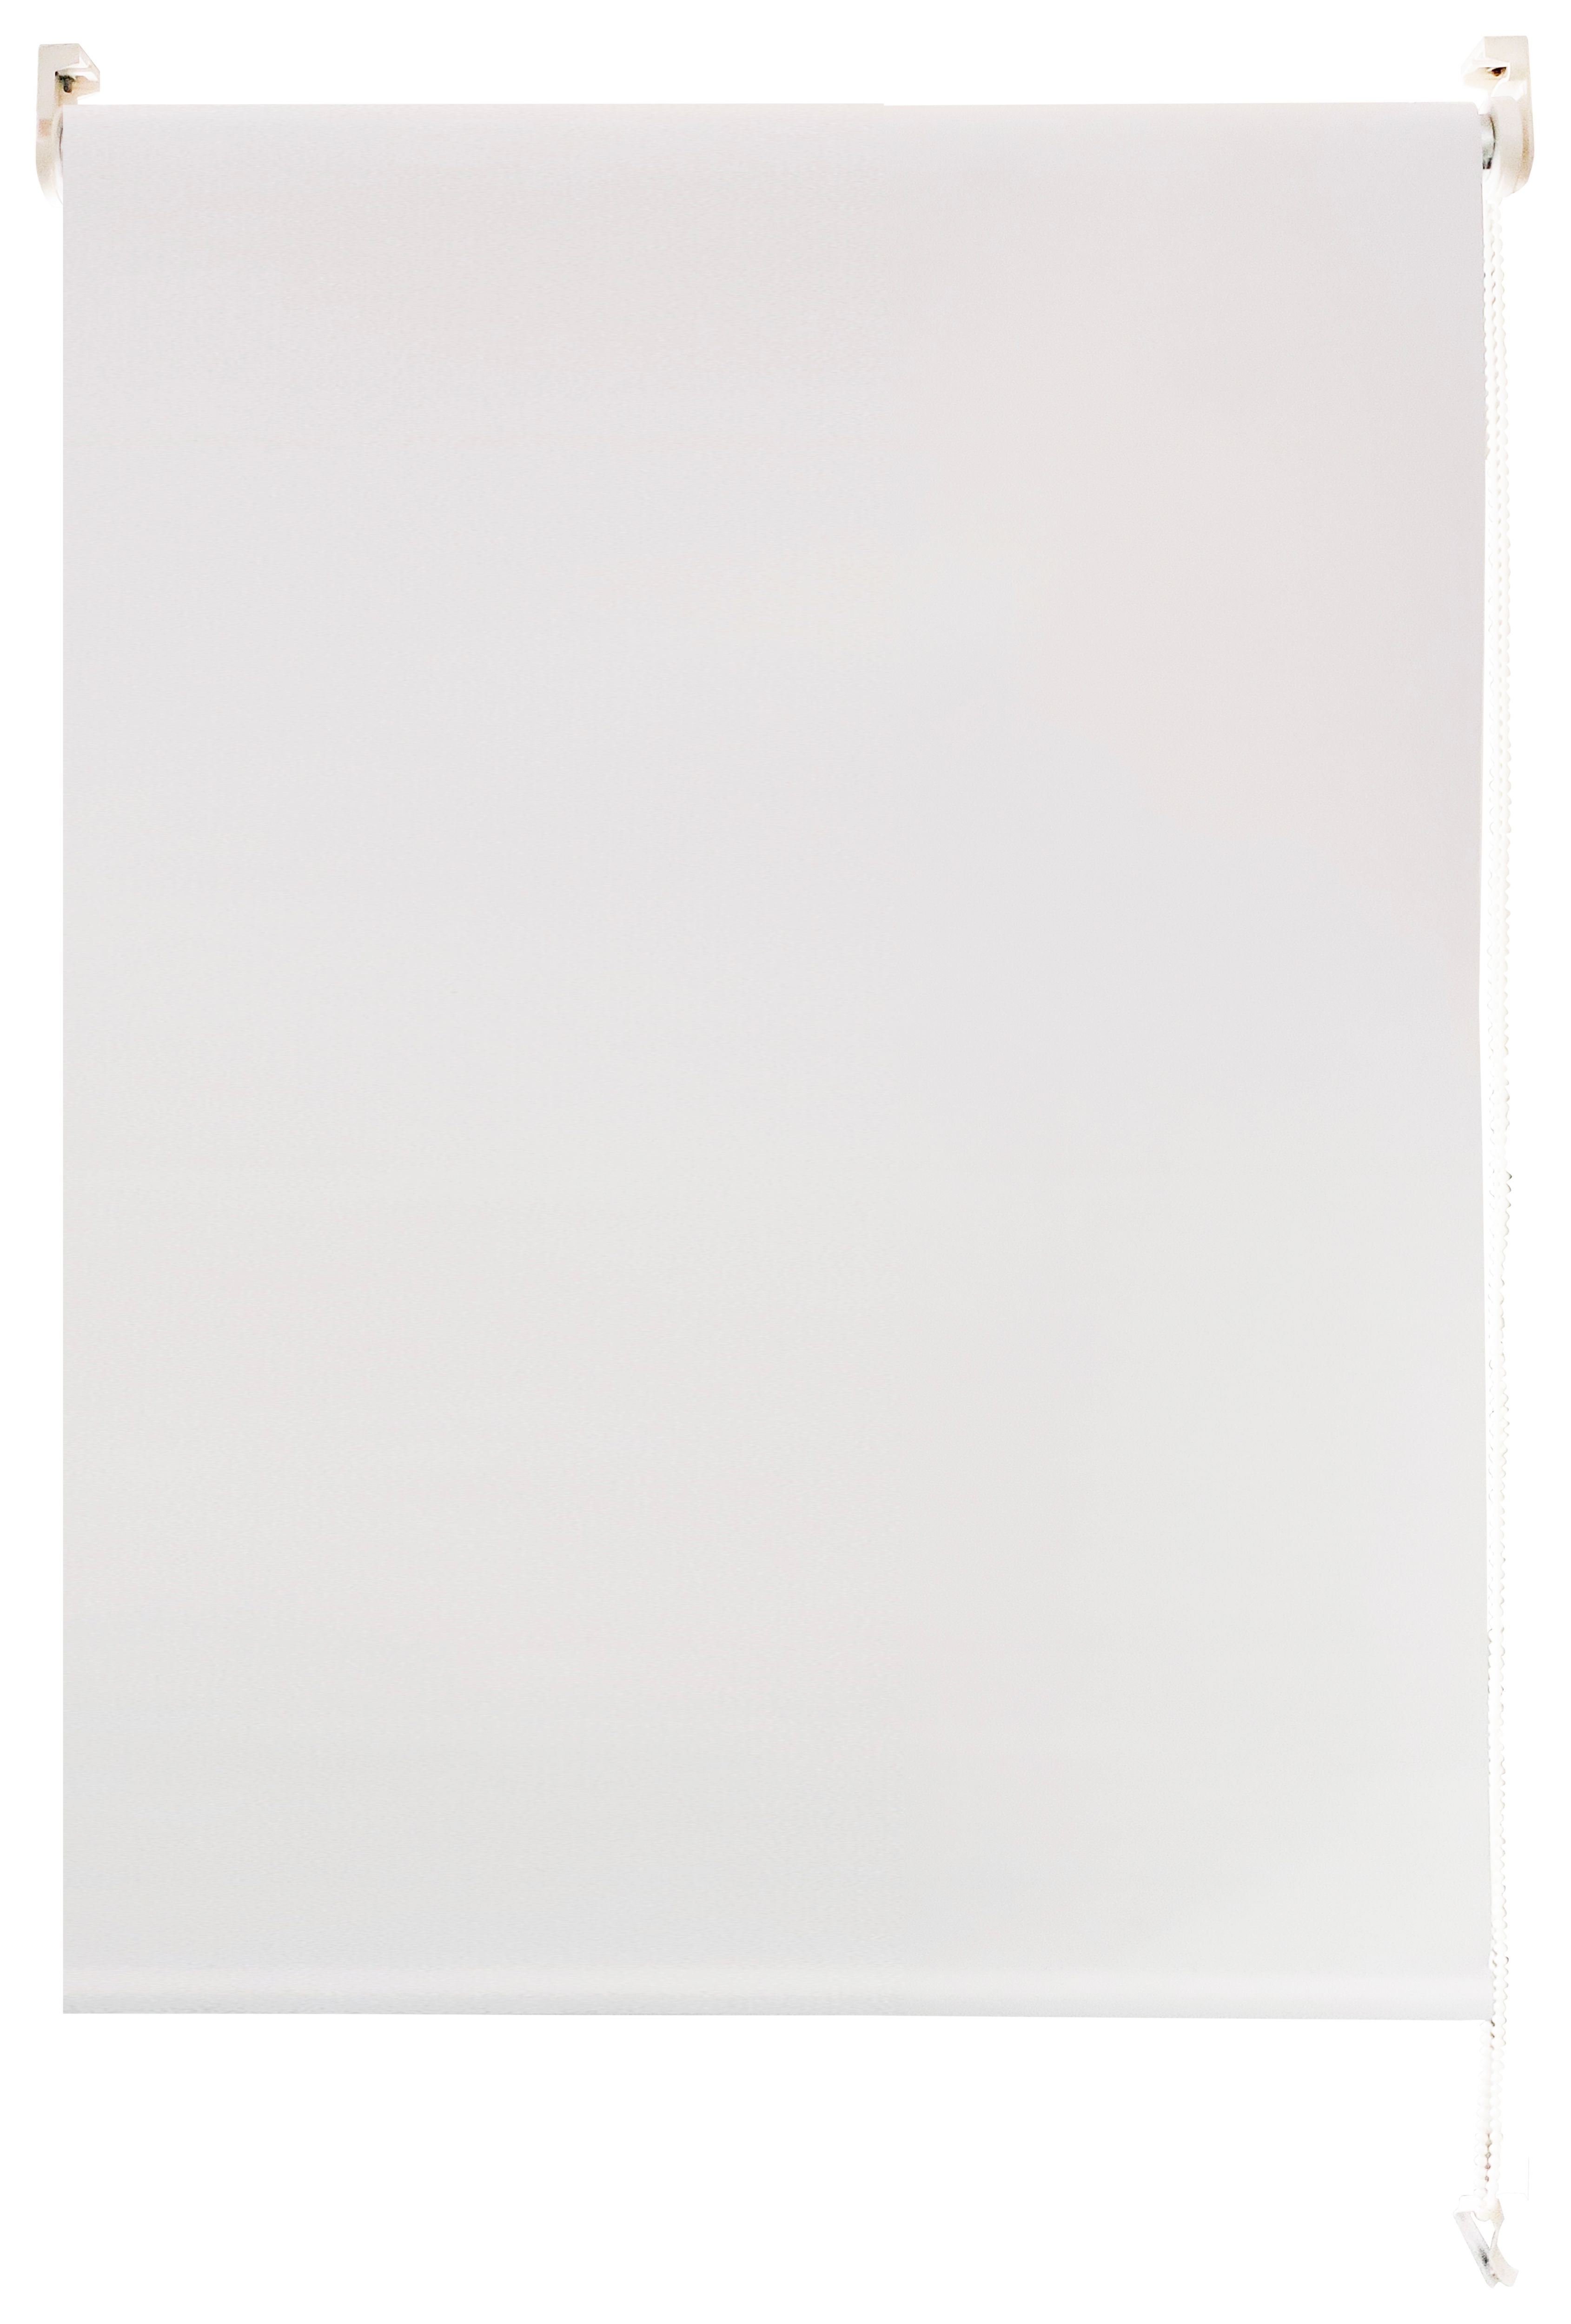 Image of Wickes Blackout Roller Blind White 180x170cm